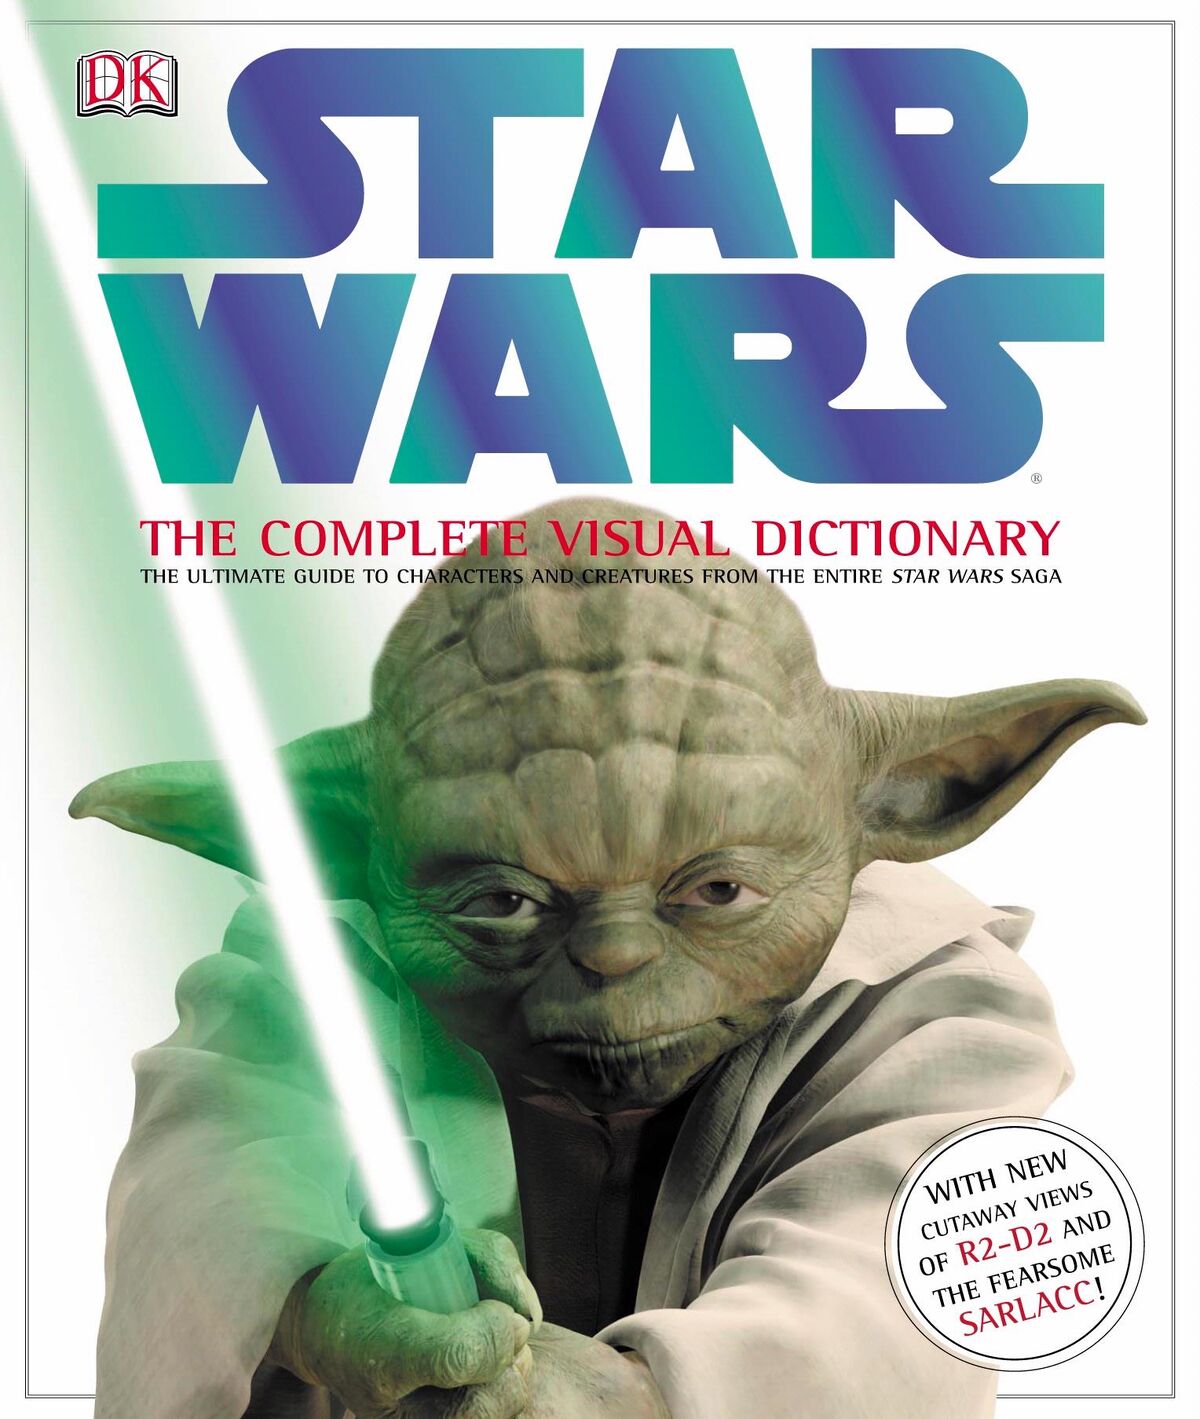 Star Wars: The Rise of Skywalker: The Visual Dictionary, Wookieepedia